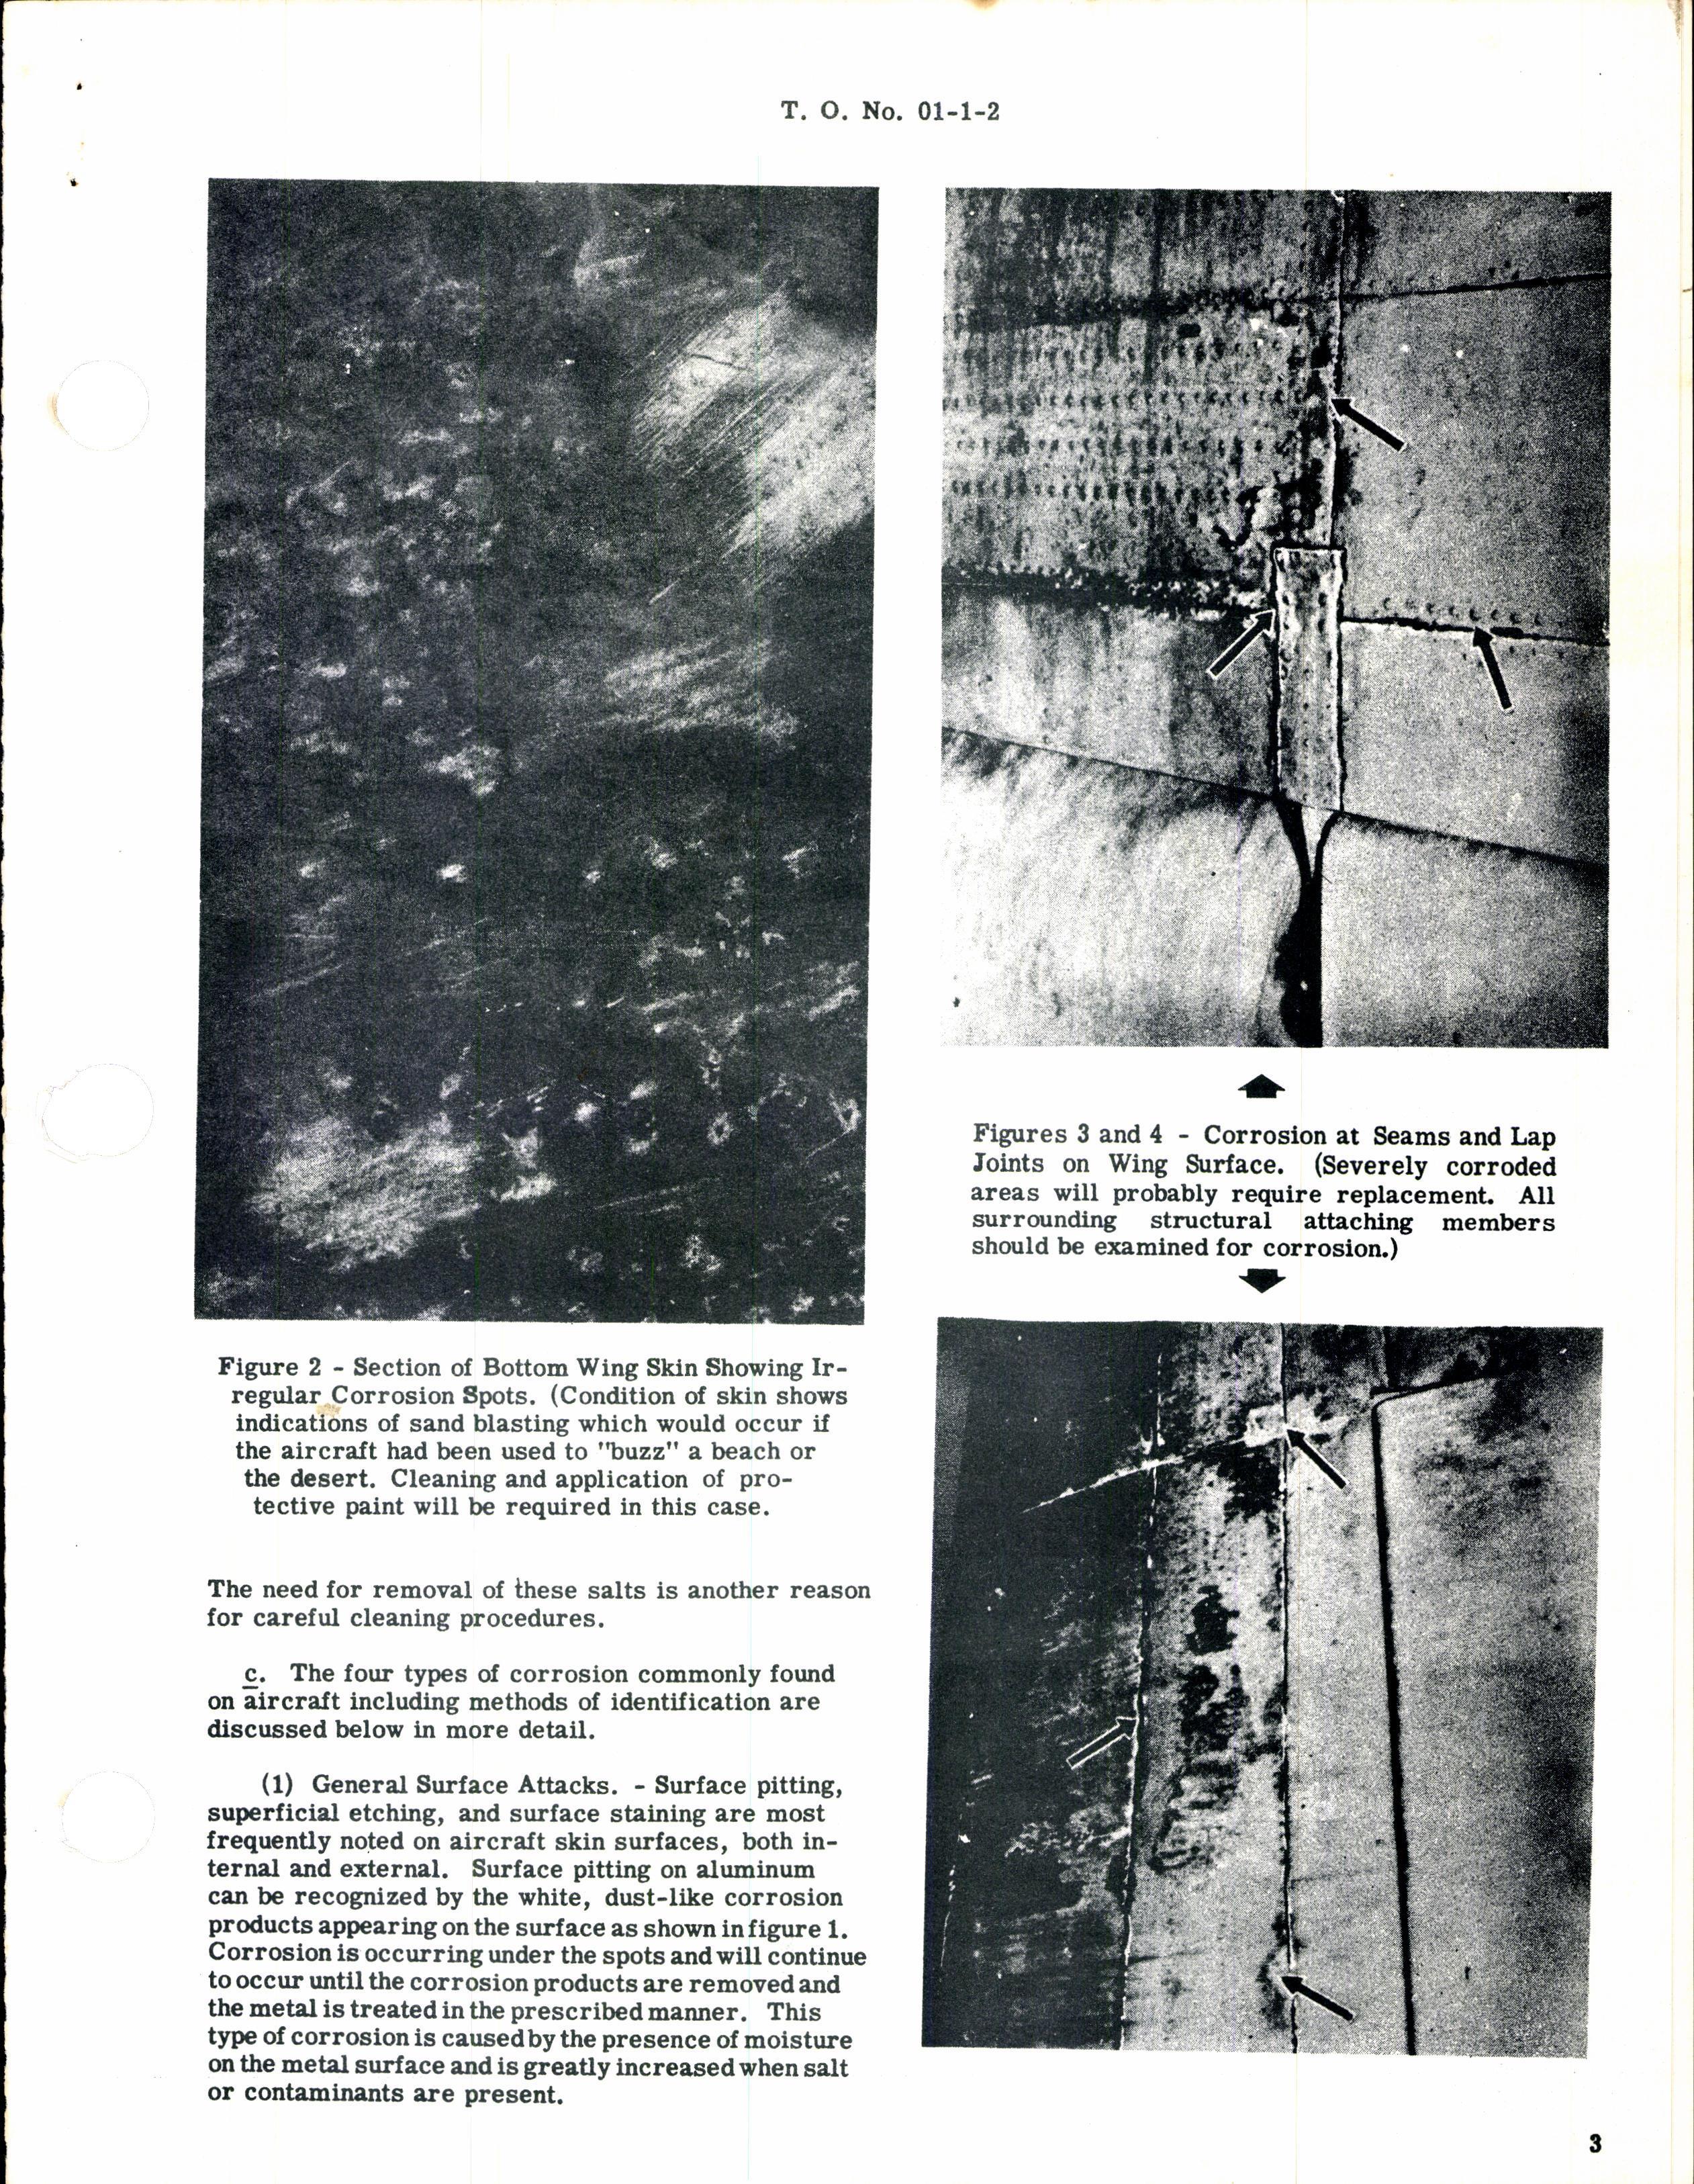 Sample page 3 from AirCorps Library document: Corrosion Treatment for Aircraft